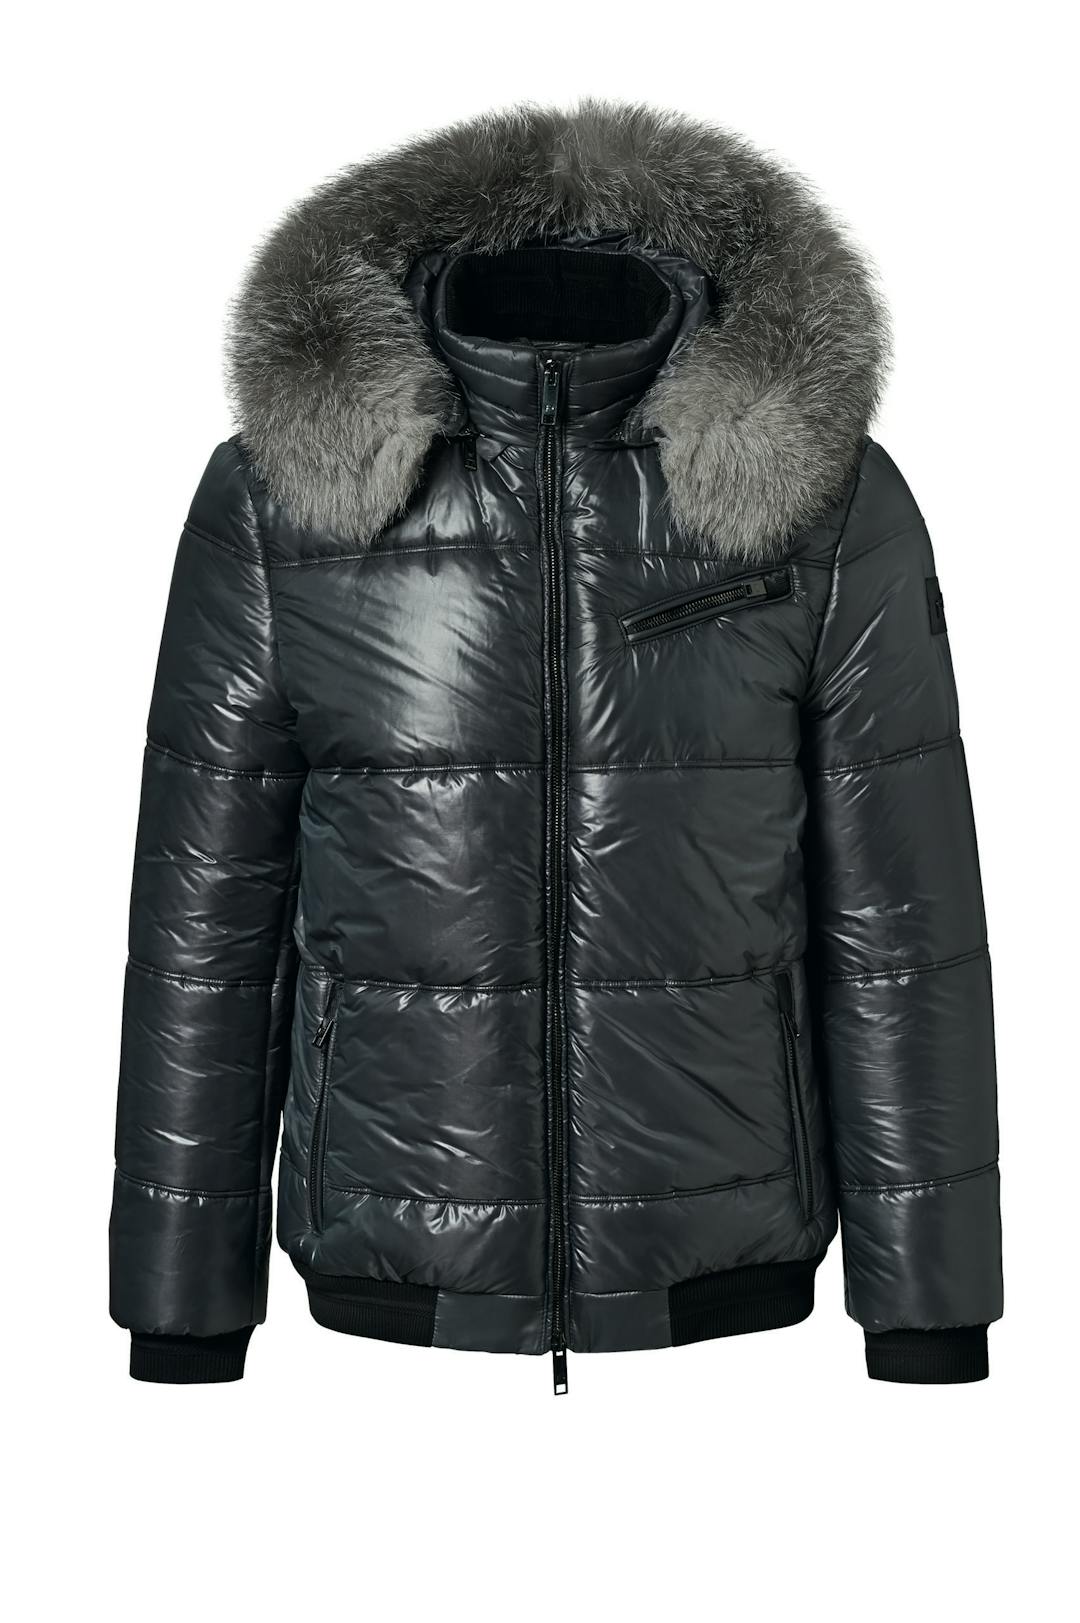 Porsche Design_FW19_M PD StormProof Thermo Bomber grey M_front_890,00€